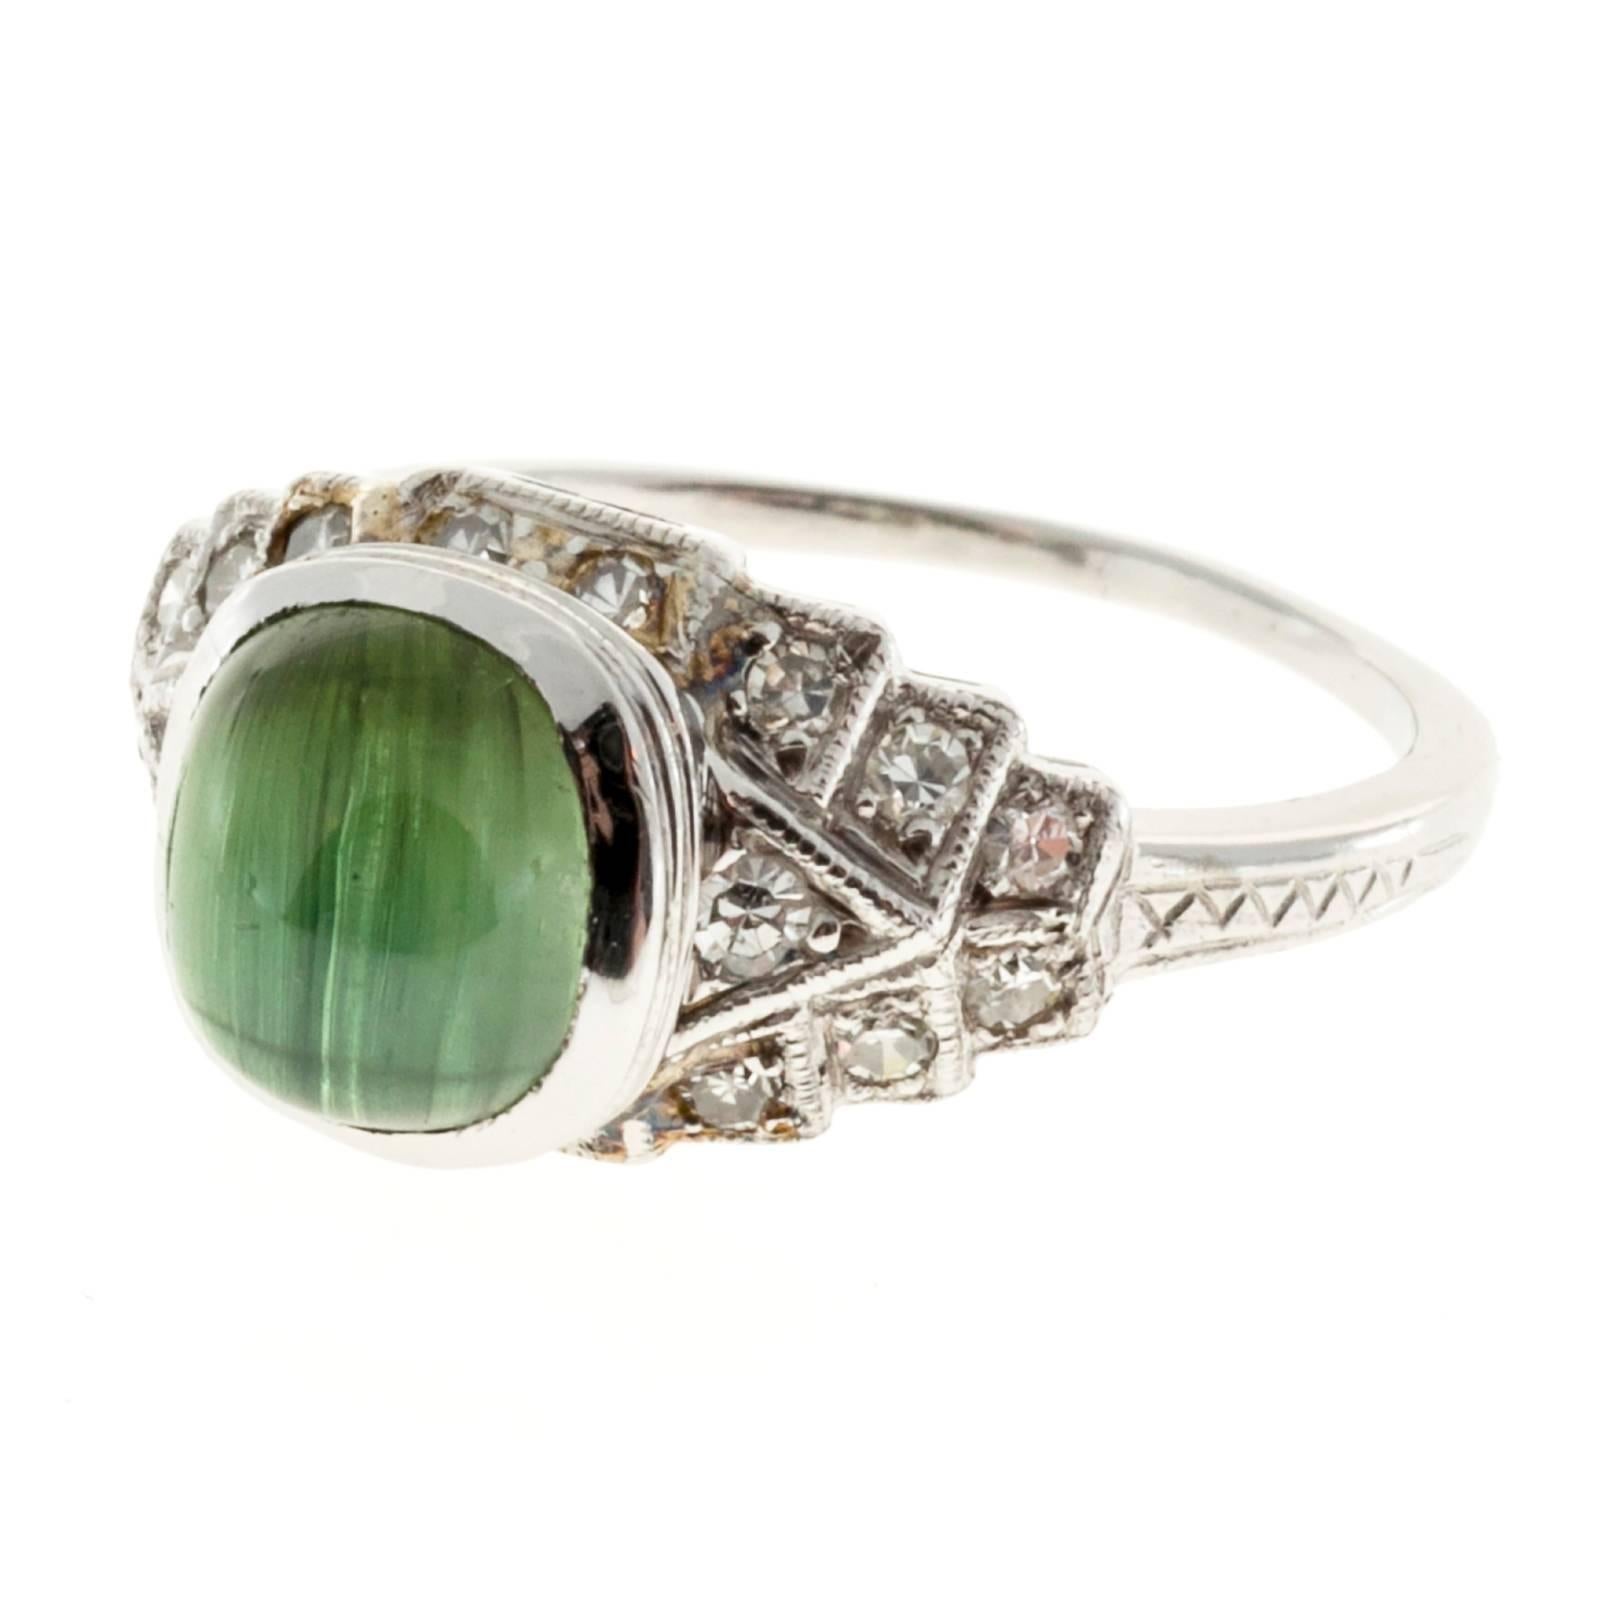 1920's Oval Tourmaline engagement ring with 18 diamonds in a platinum setting. 

1 genuine natural oval 2.10ct cat's eye Tourmaline.
18 diamonds, G, VS1- SI, .22cts
Platinum
5.0 grams
3/8 inch wide
Size 6 and sizable
